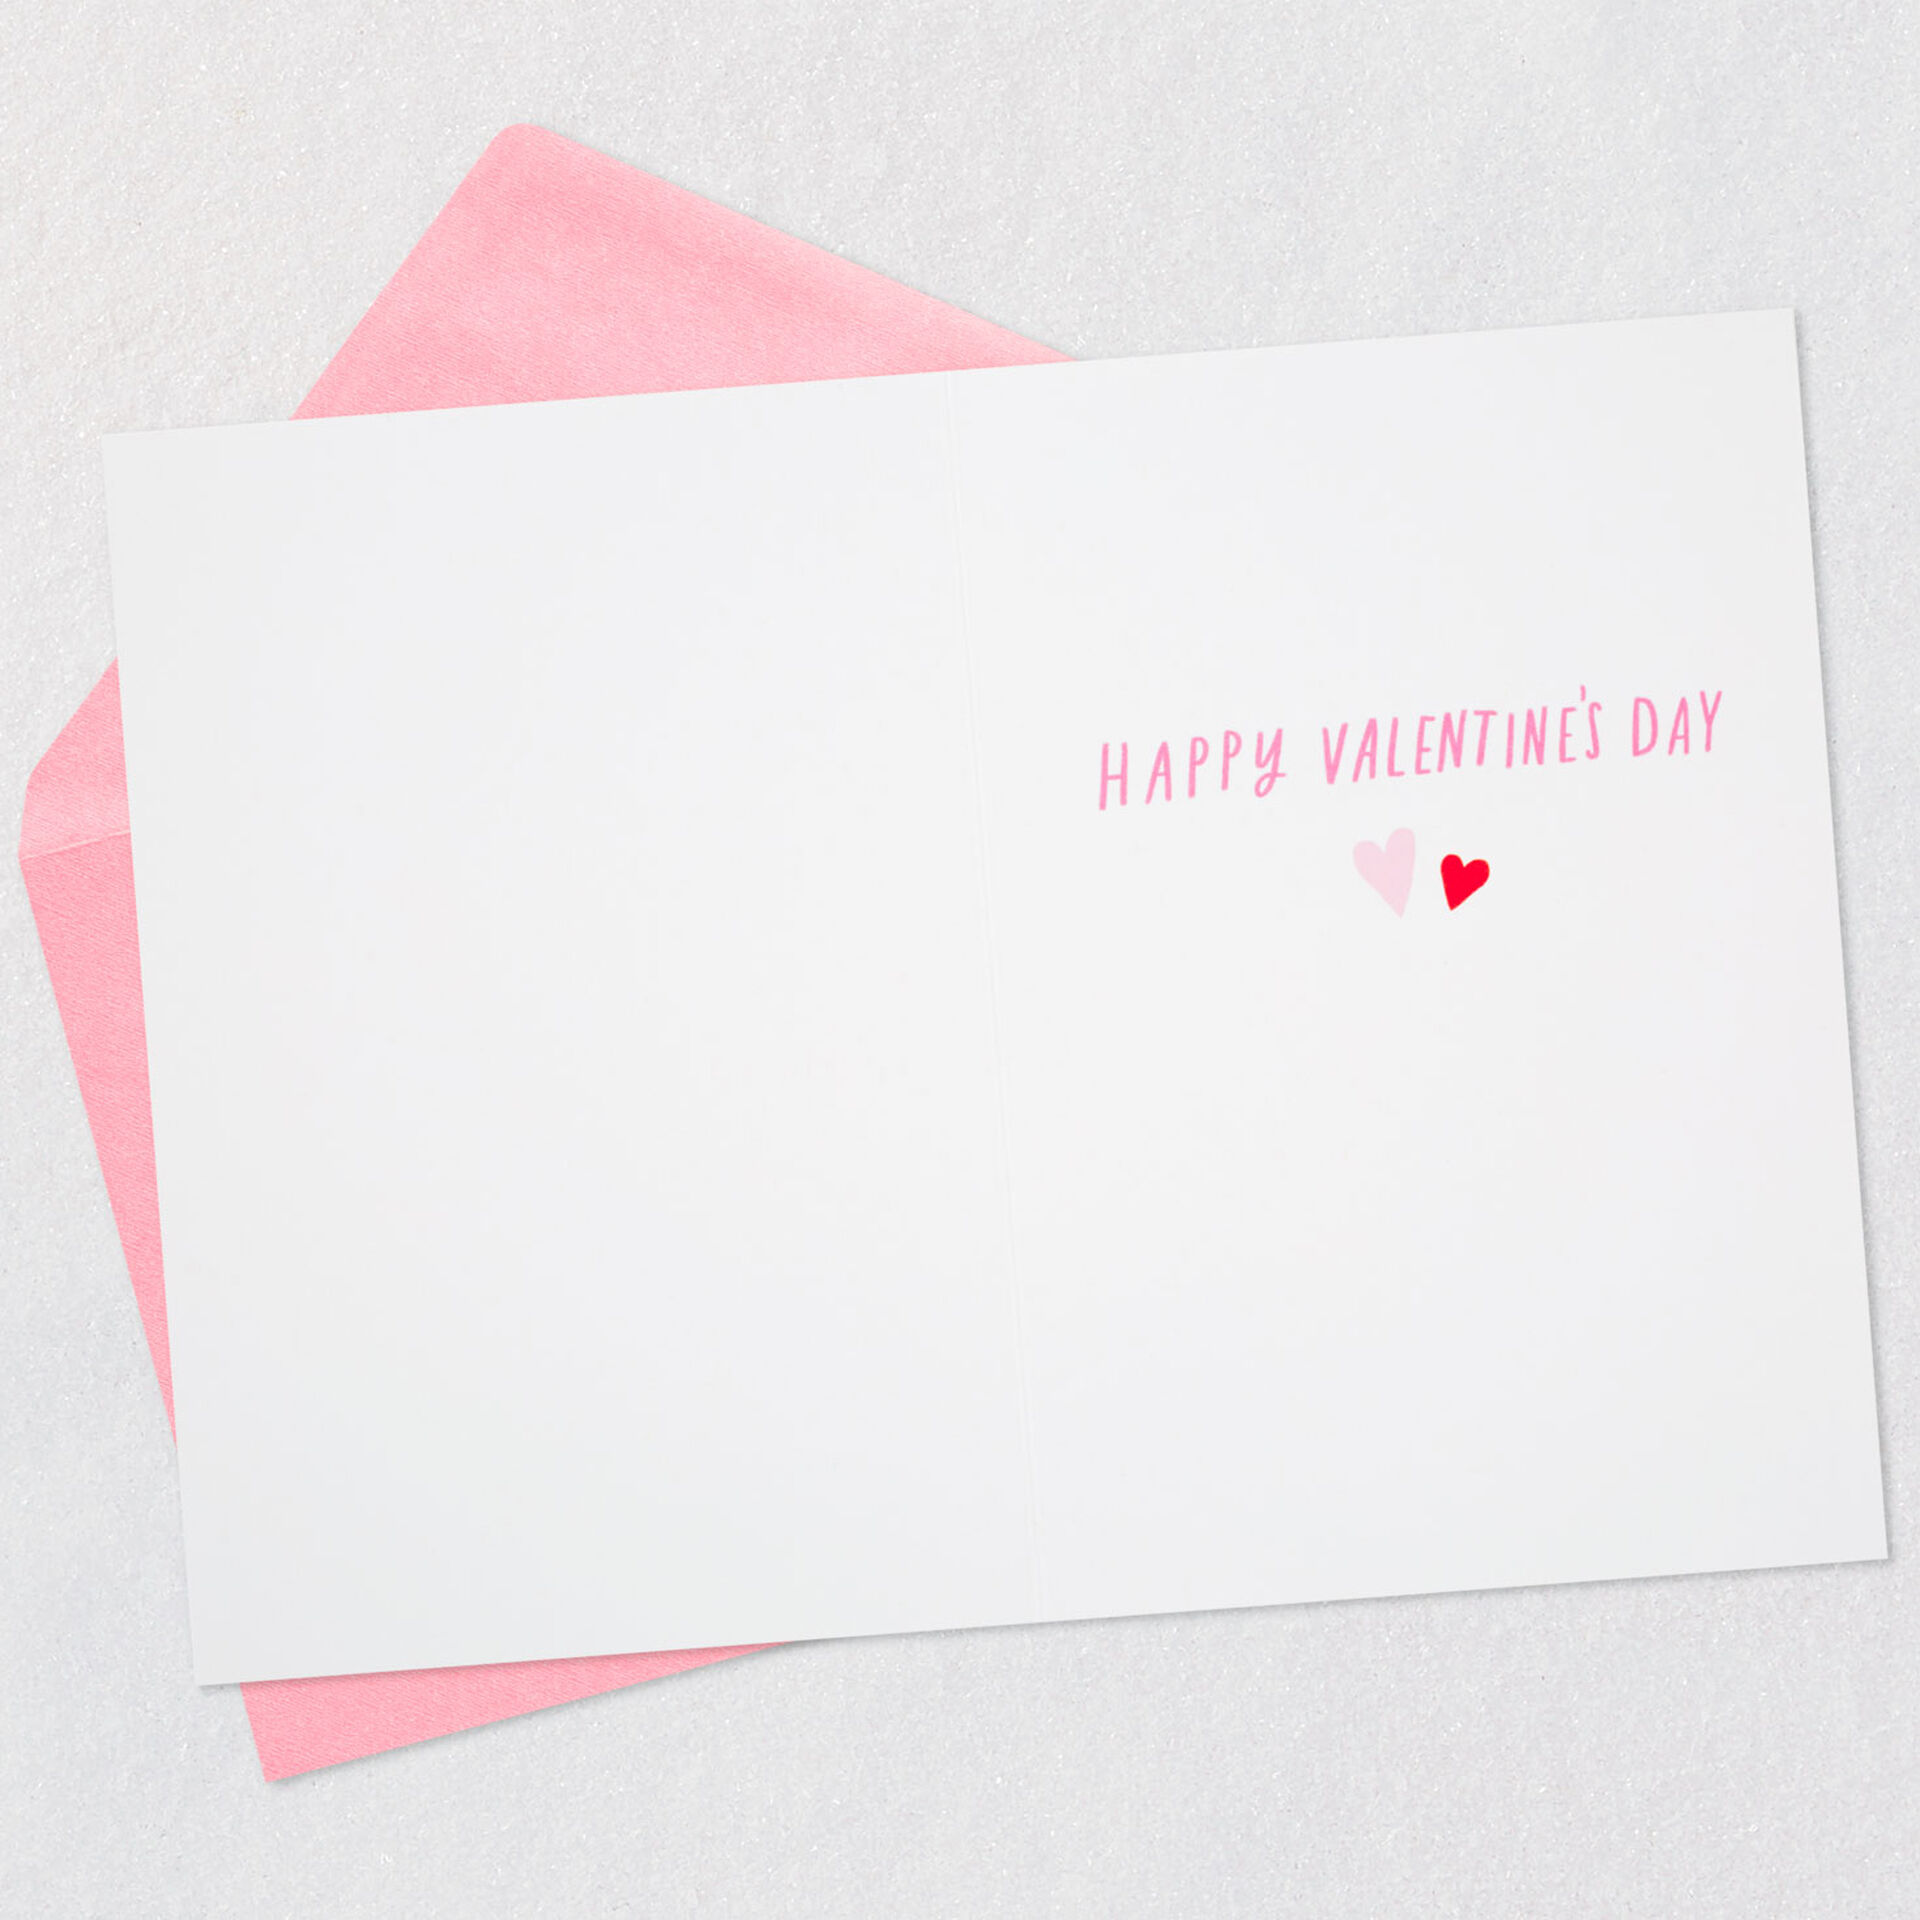 Lettering-and-Hearts-Valentines-Day-Card-for-Friend_399V6993_03